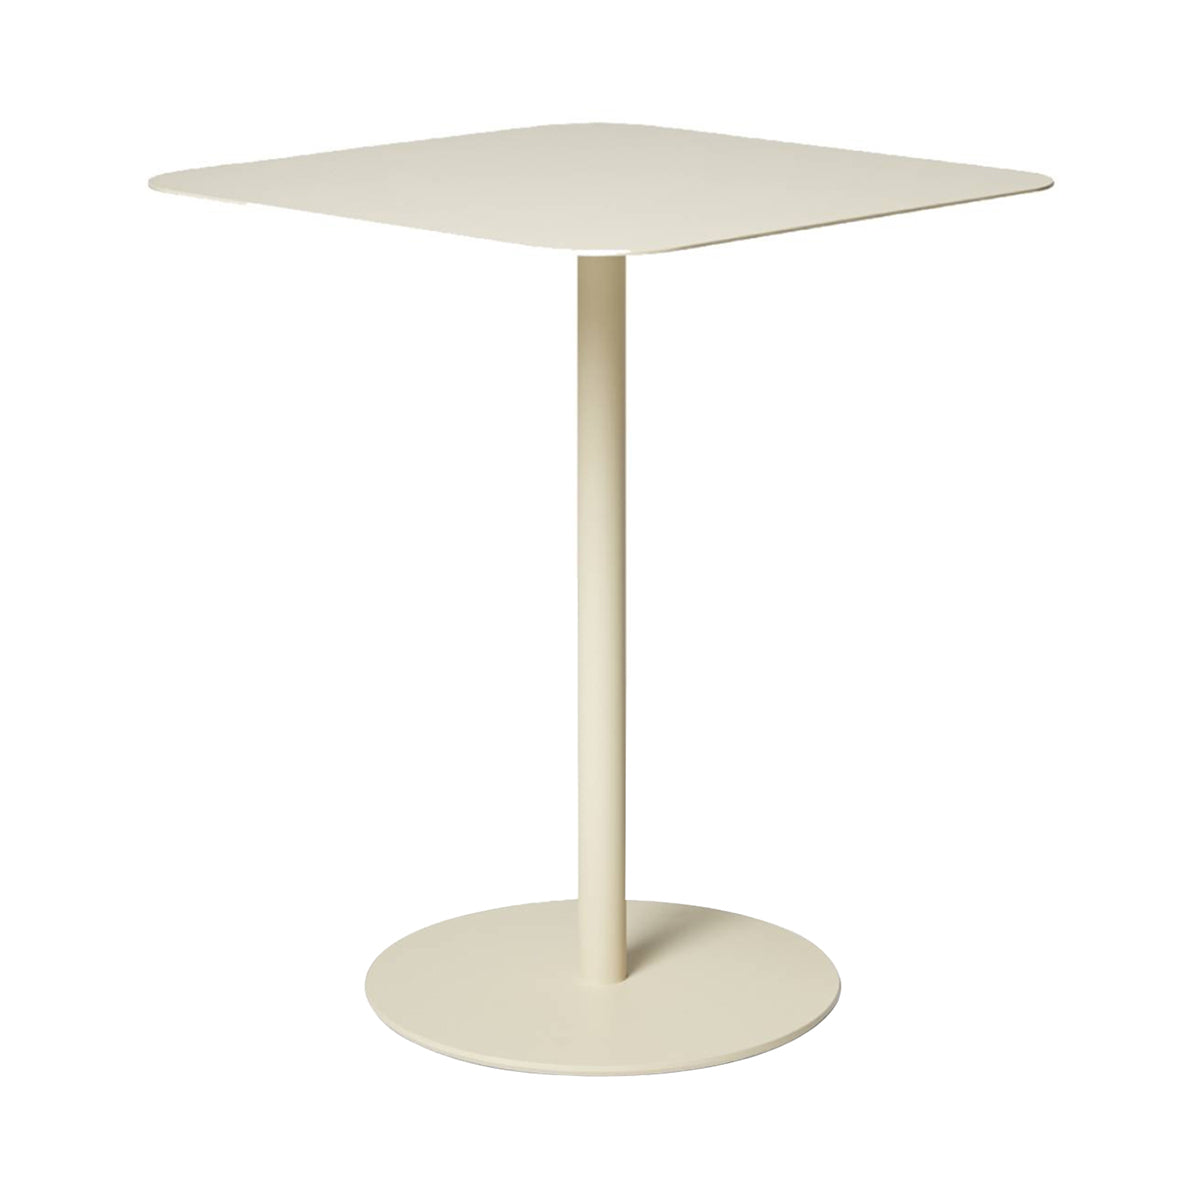 Odette Square Dining Table: Metal Top + High + Medium - 19.3